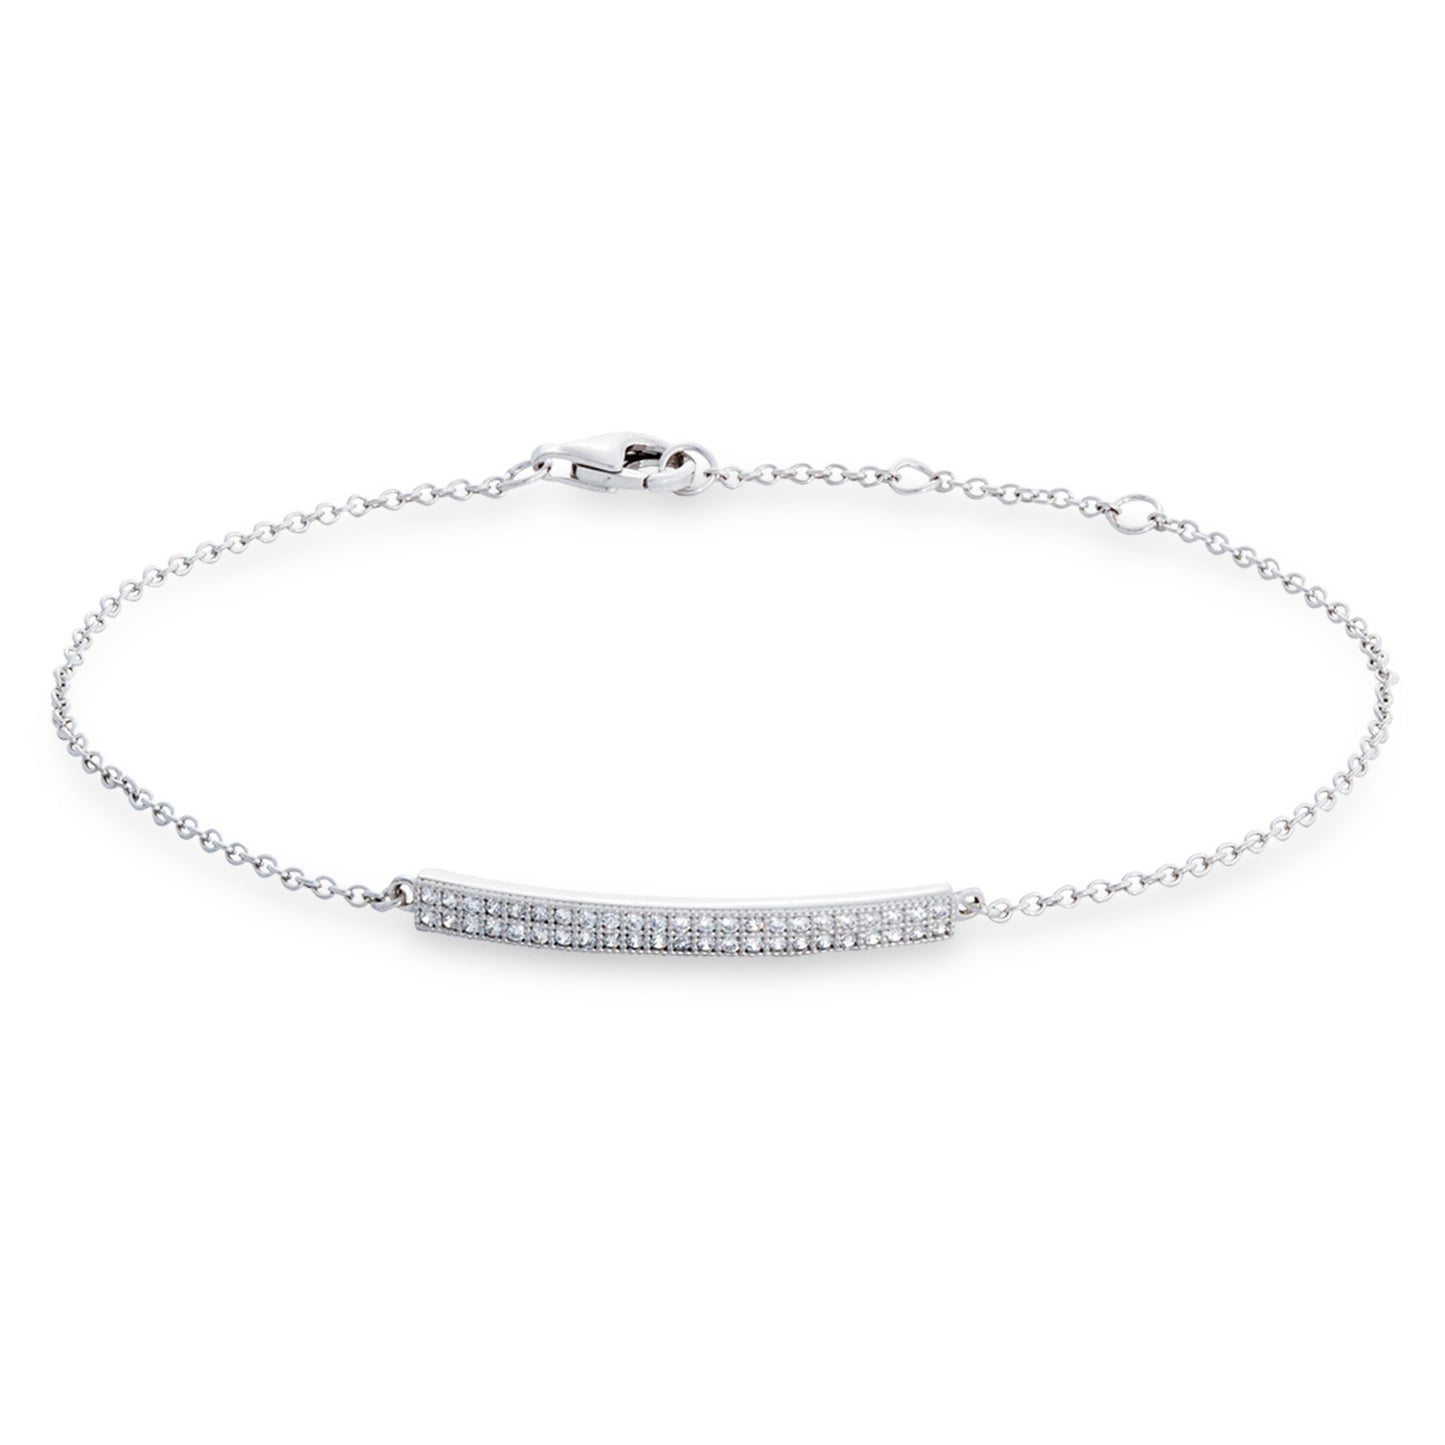 A two row bar adjustable bracelet with 46 simulated diamonds displayed on a neutral white background.